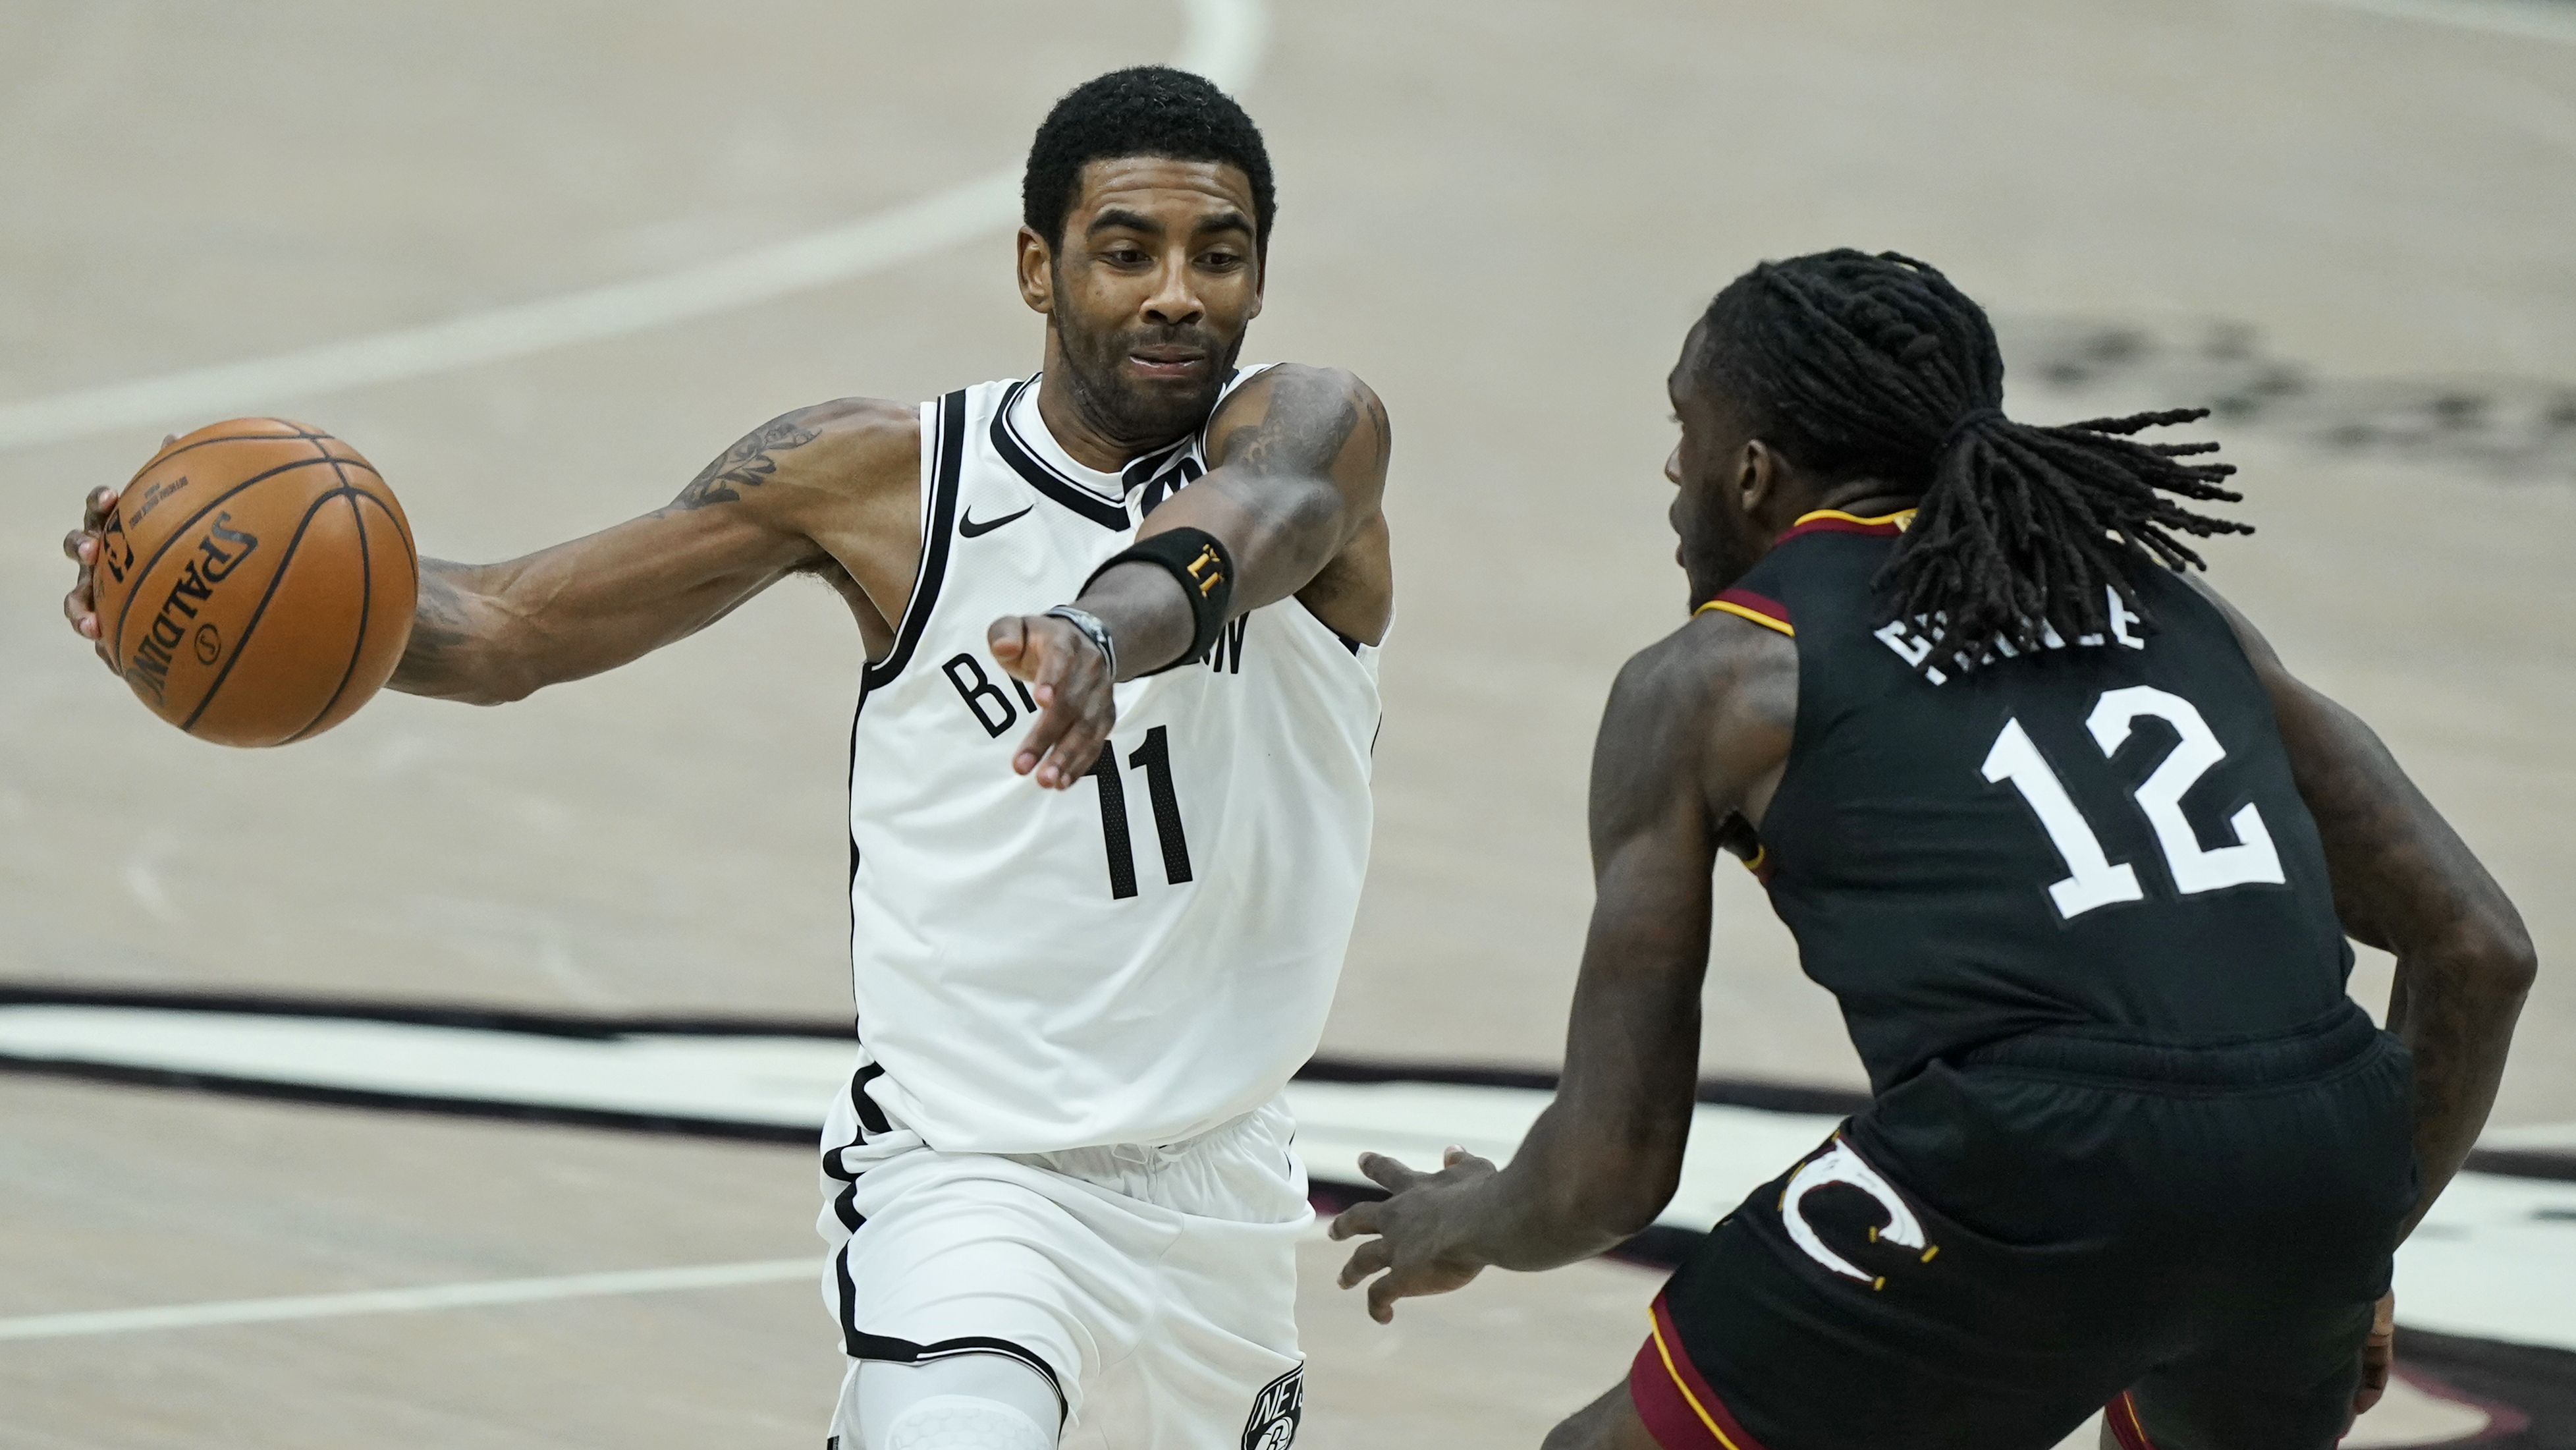 Cleveland Cavaliers' Kyrie Irving steps up play in Eastern